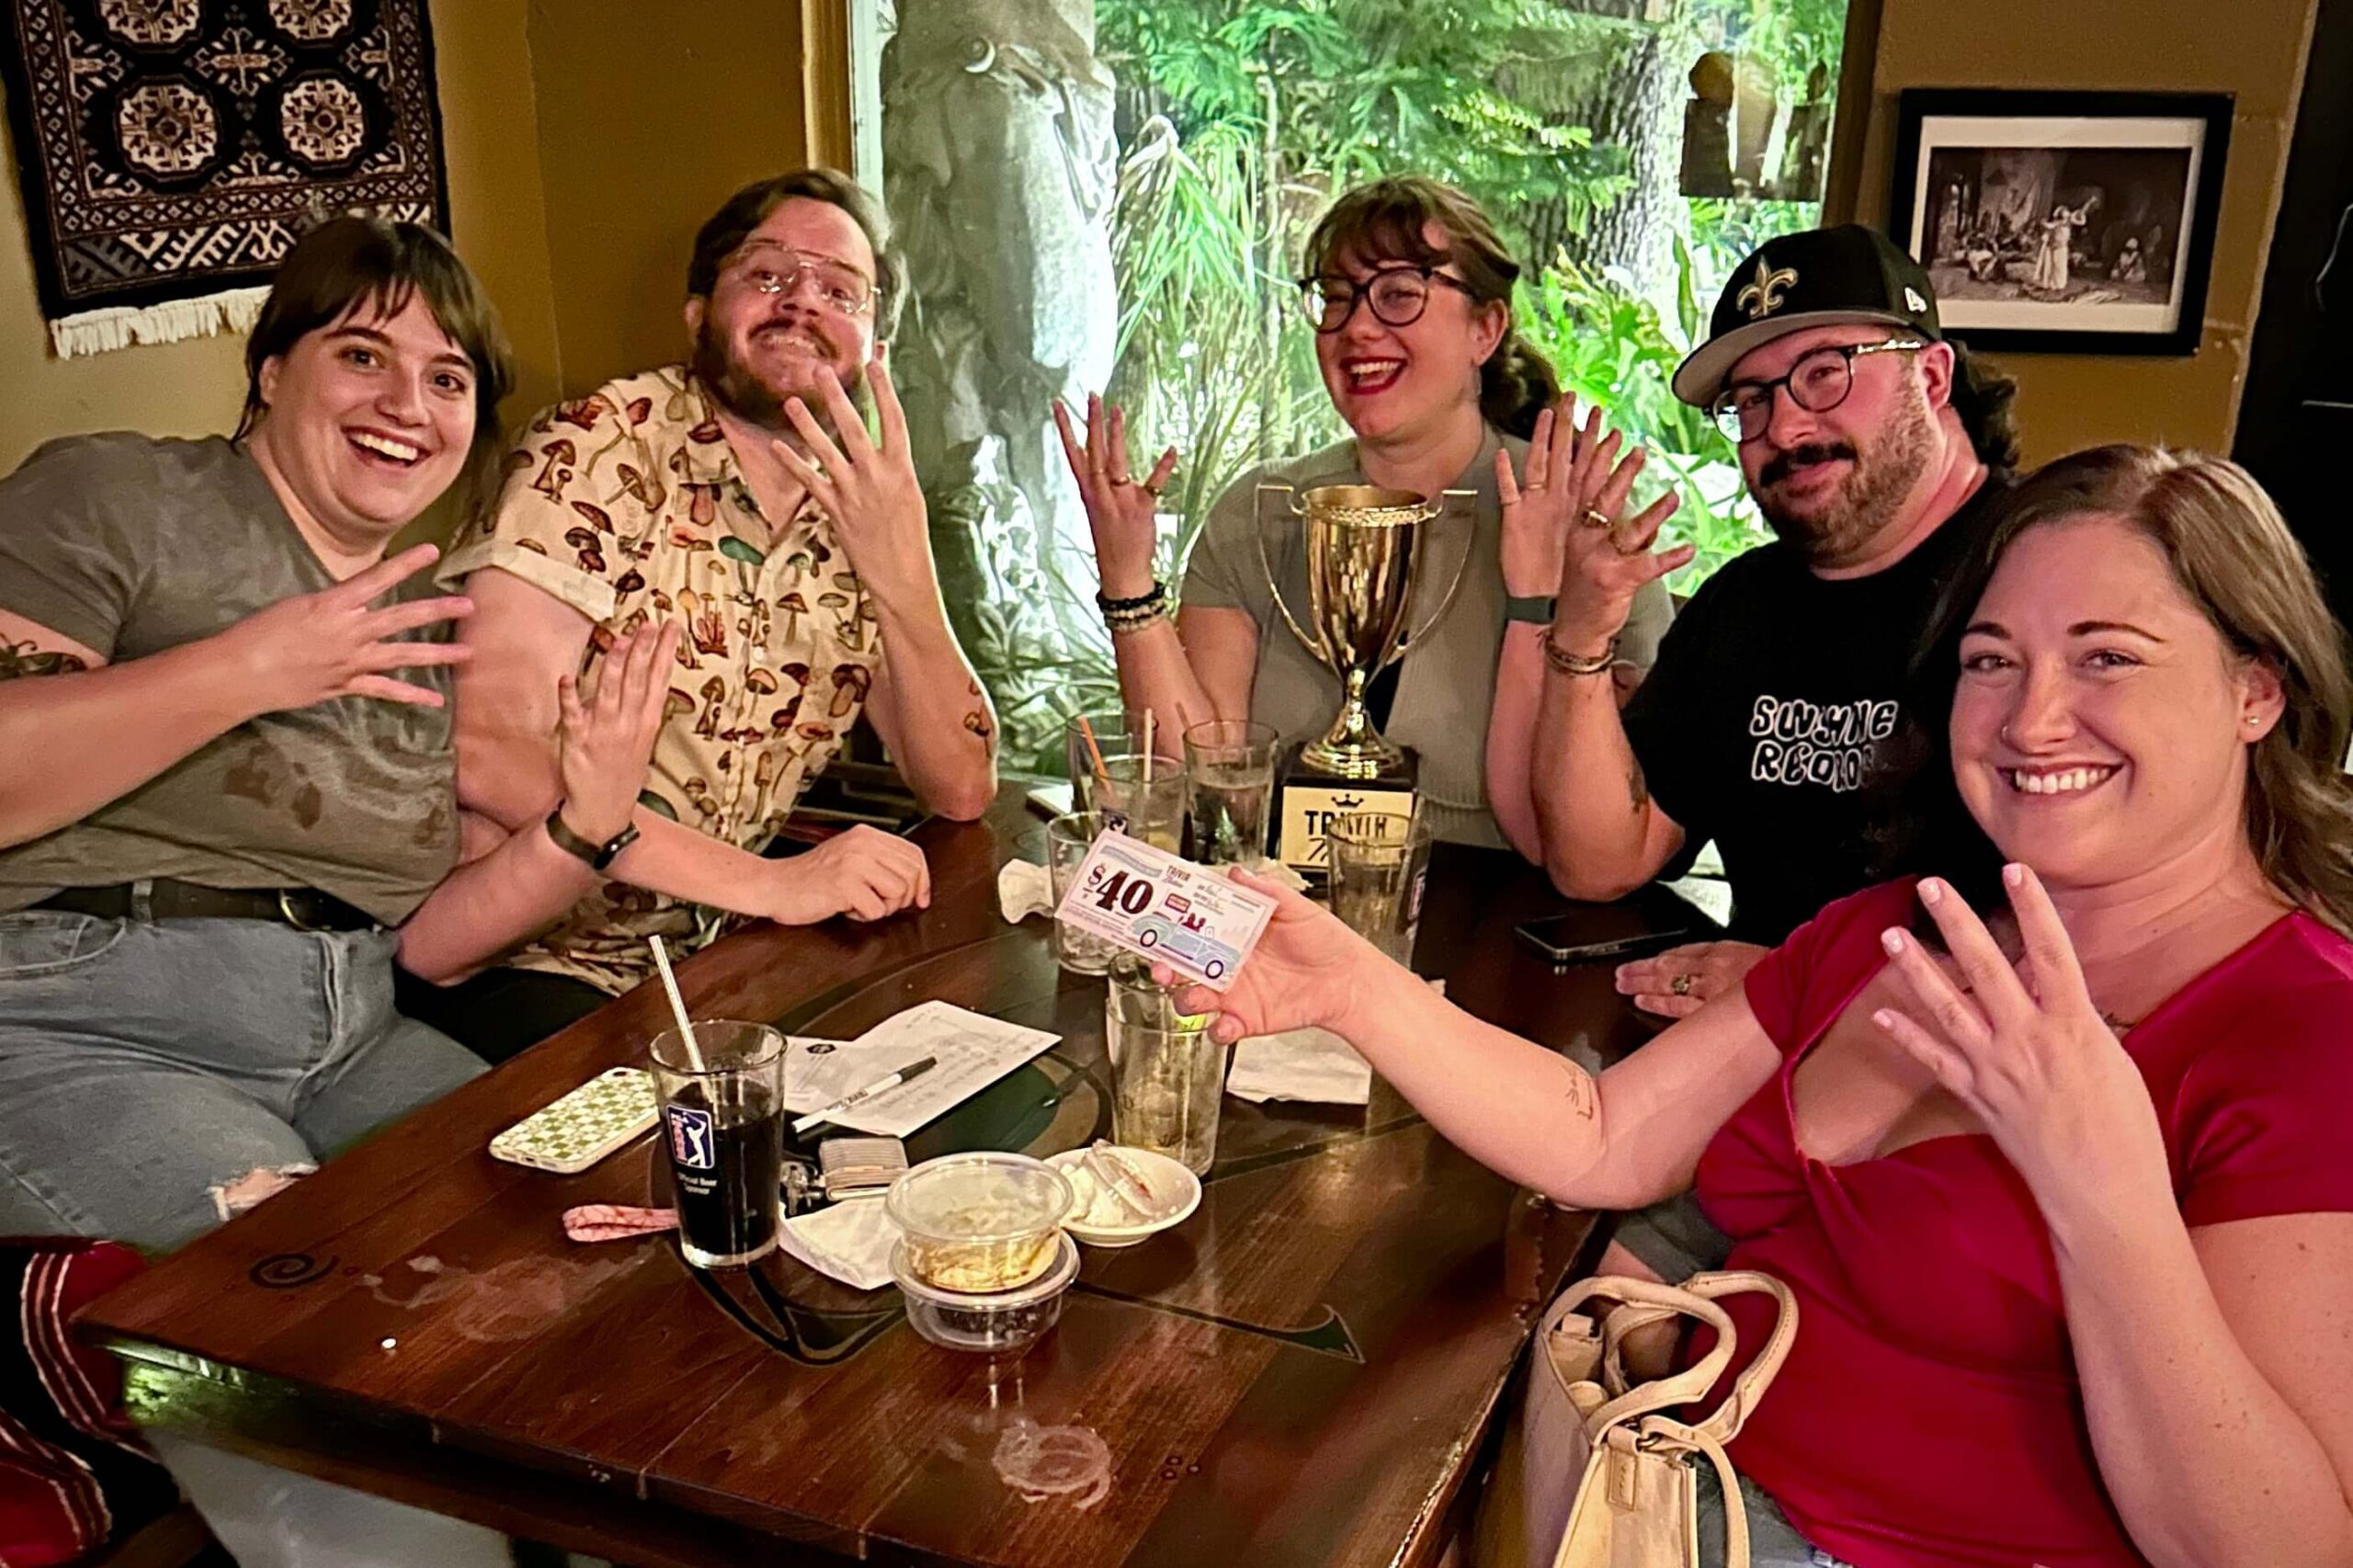 The Casbah Cafe Jacksonville FL 32205 trivia night: group of young adults seated around a table smiling and holding up their hands in celebration with a Trivia Nation trophy and drink glasses on the table